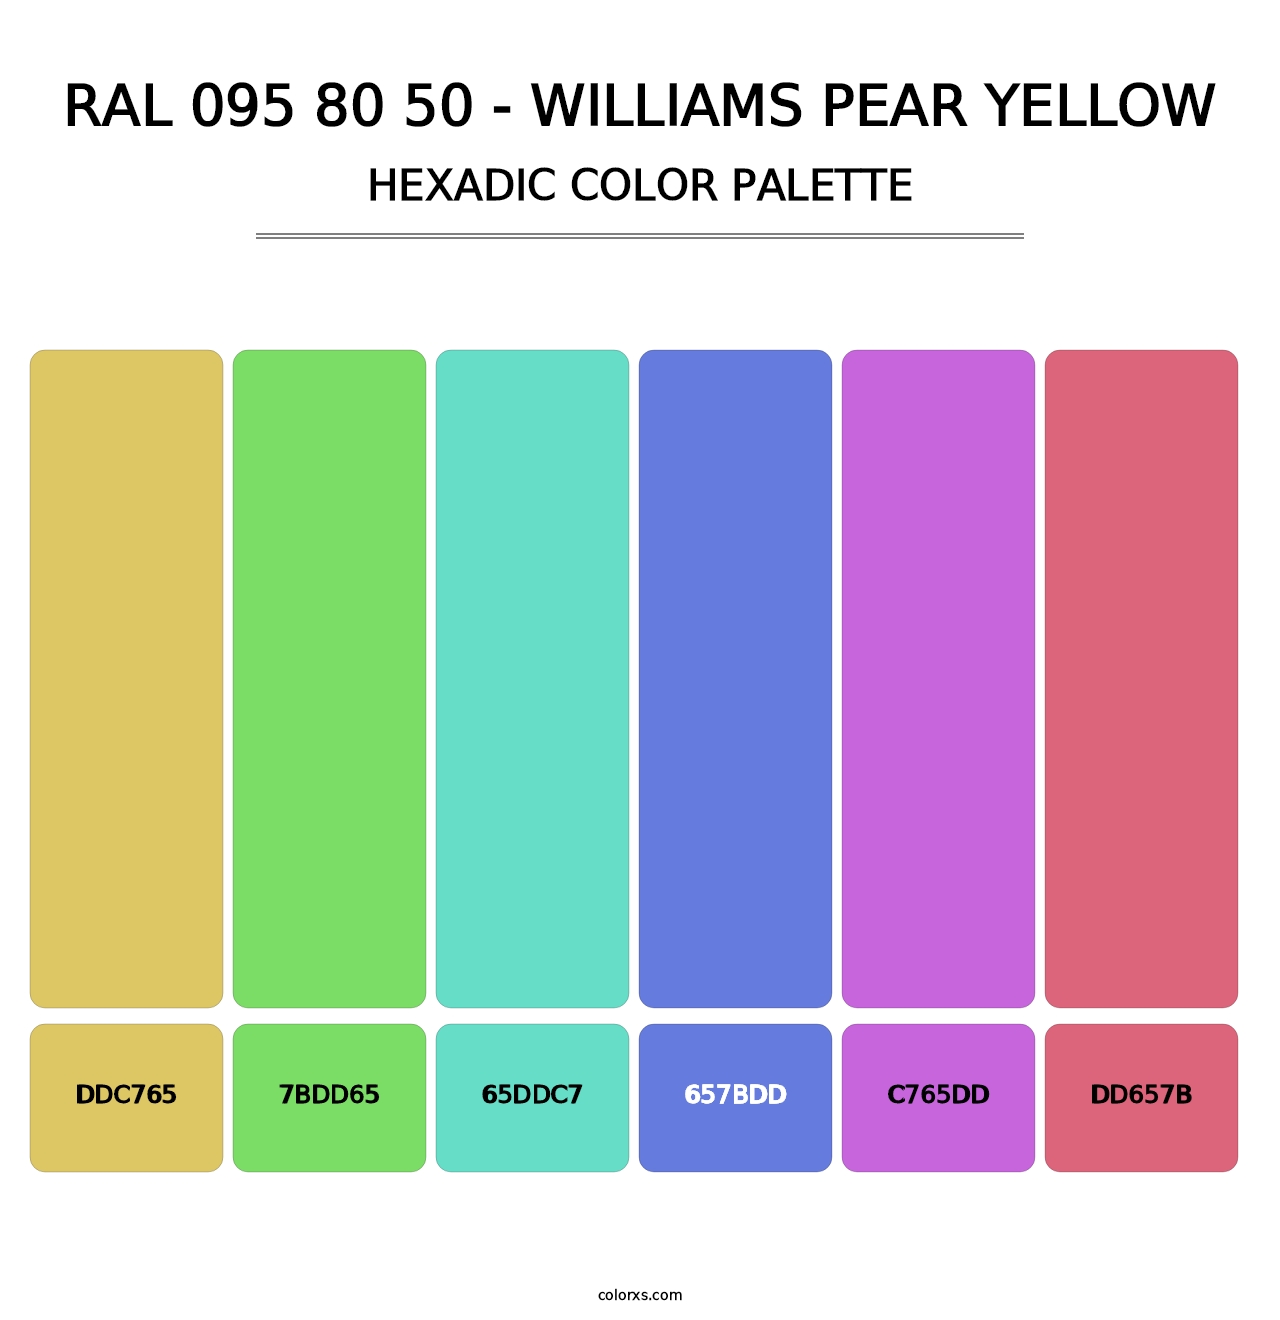 RAL 095 80 50 - Williams Pear Yellow - Hexadic Color Palette